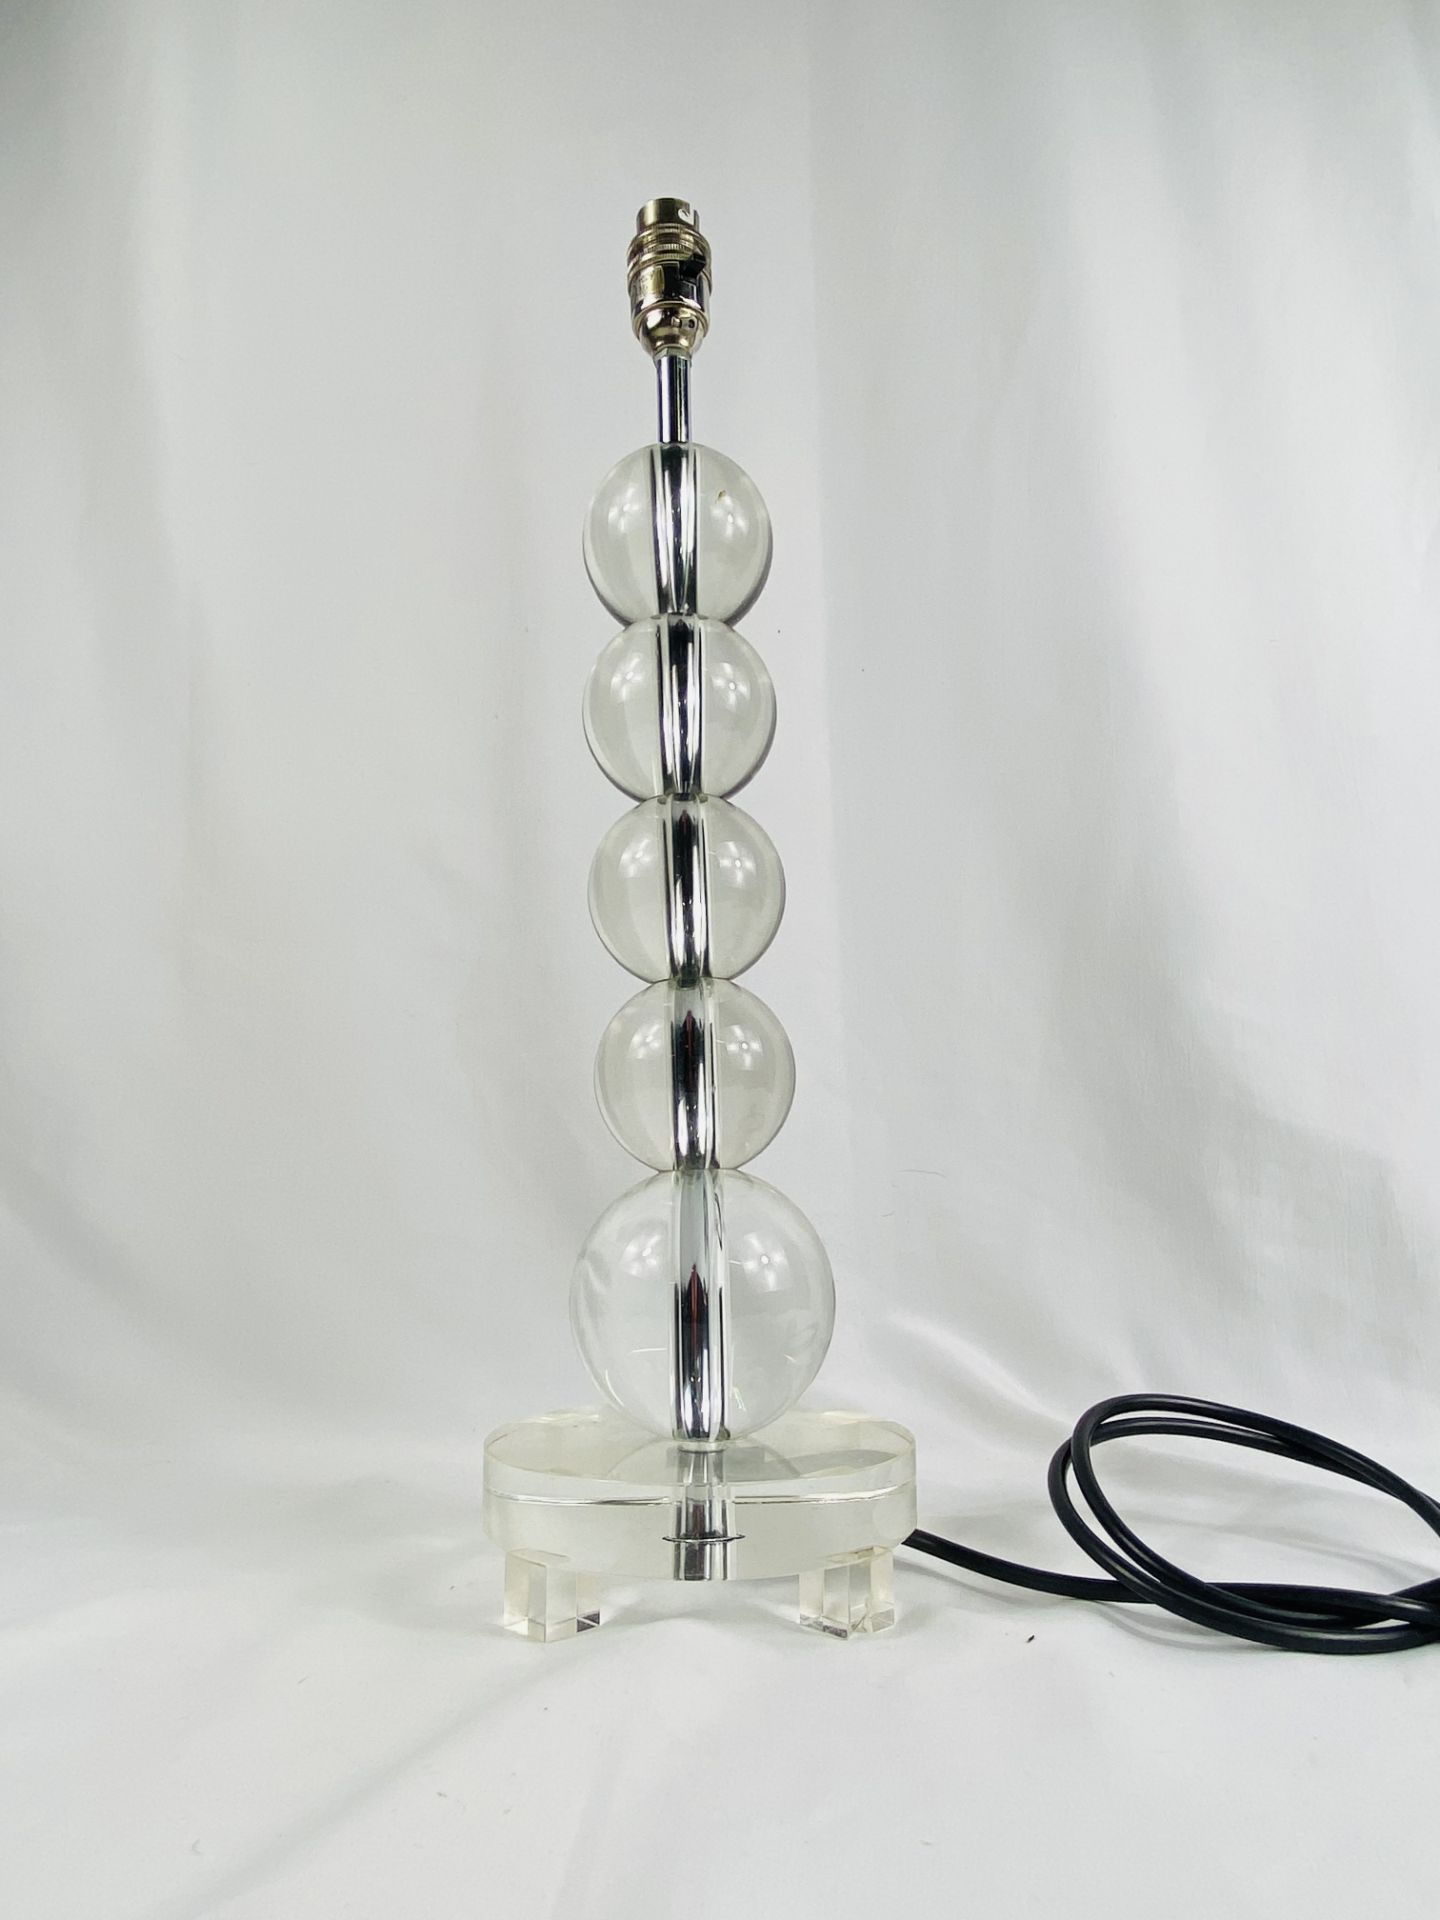 Contemporary glass and chrome table lamp - Image 4 of 5